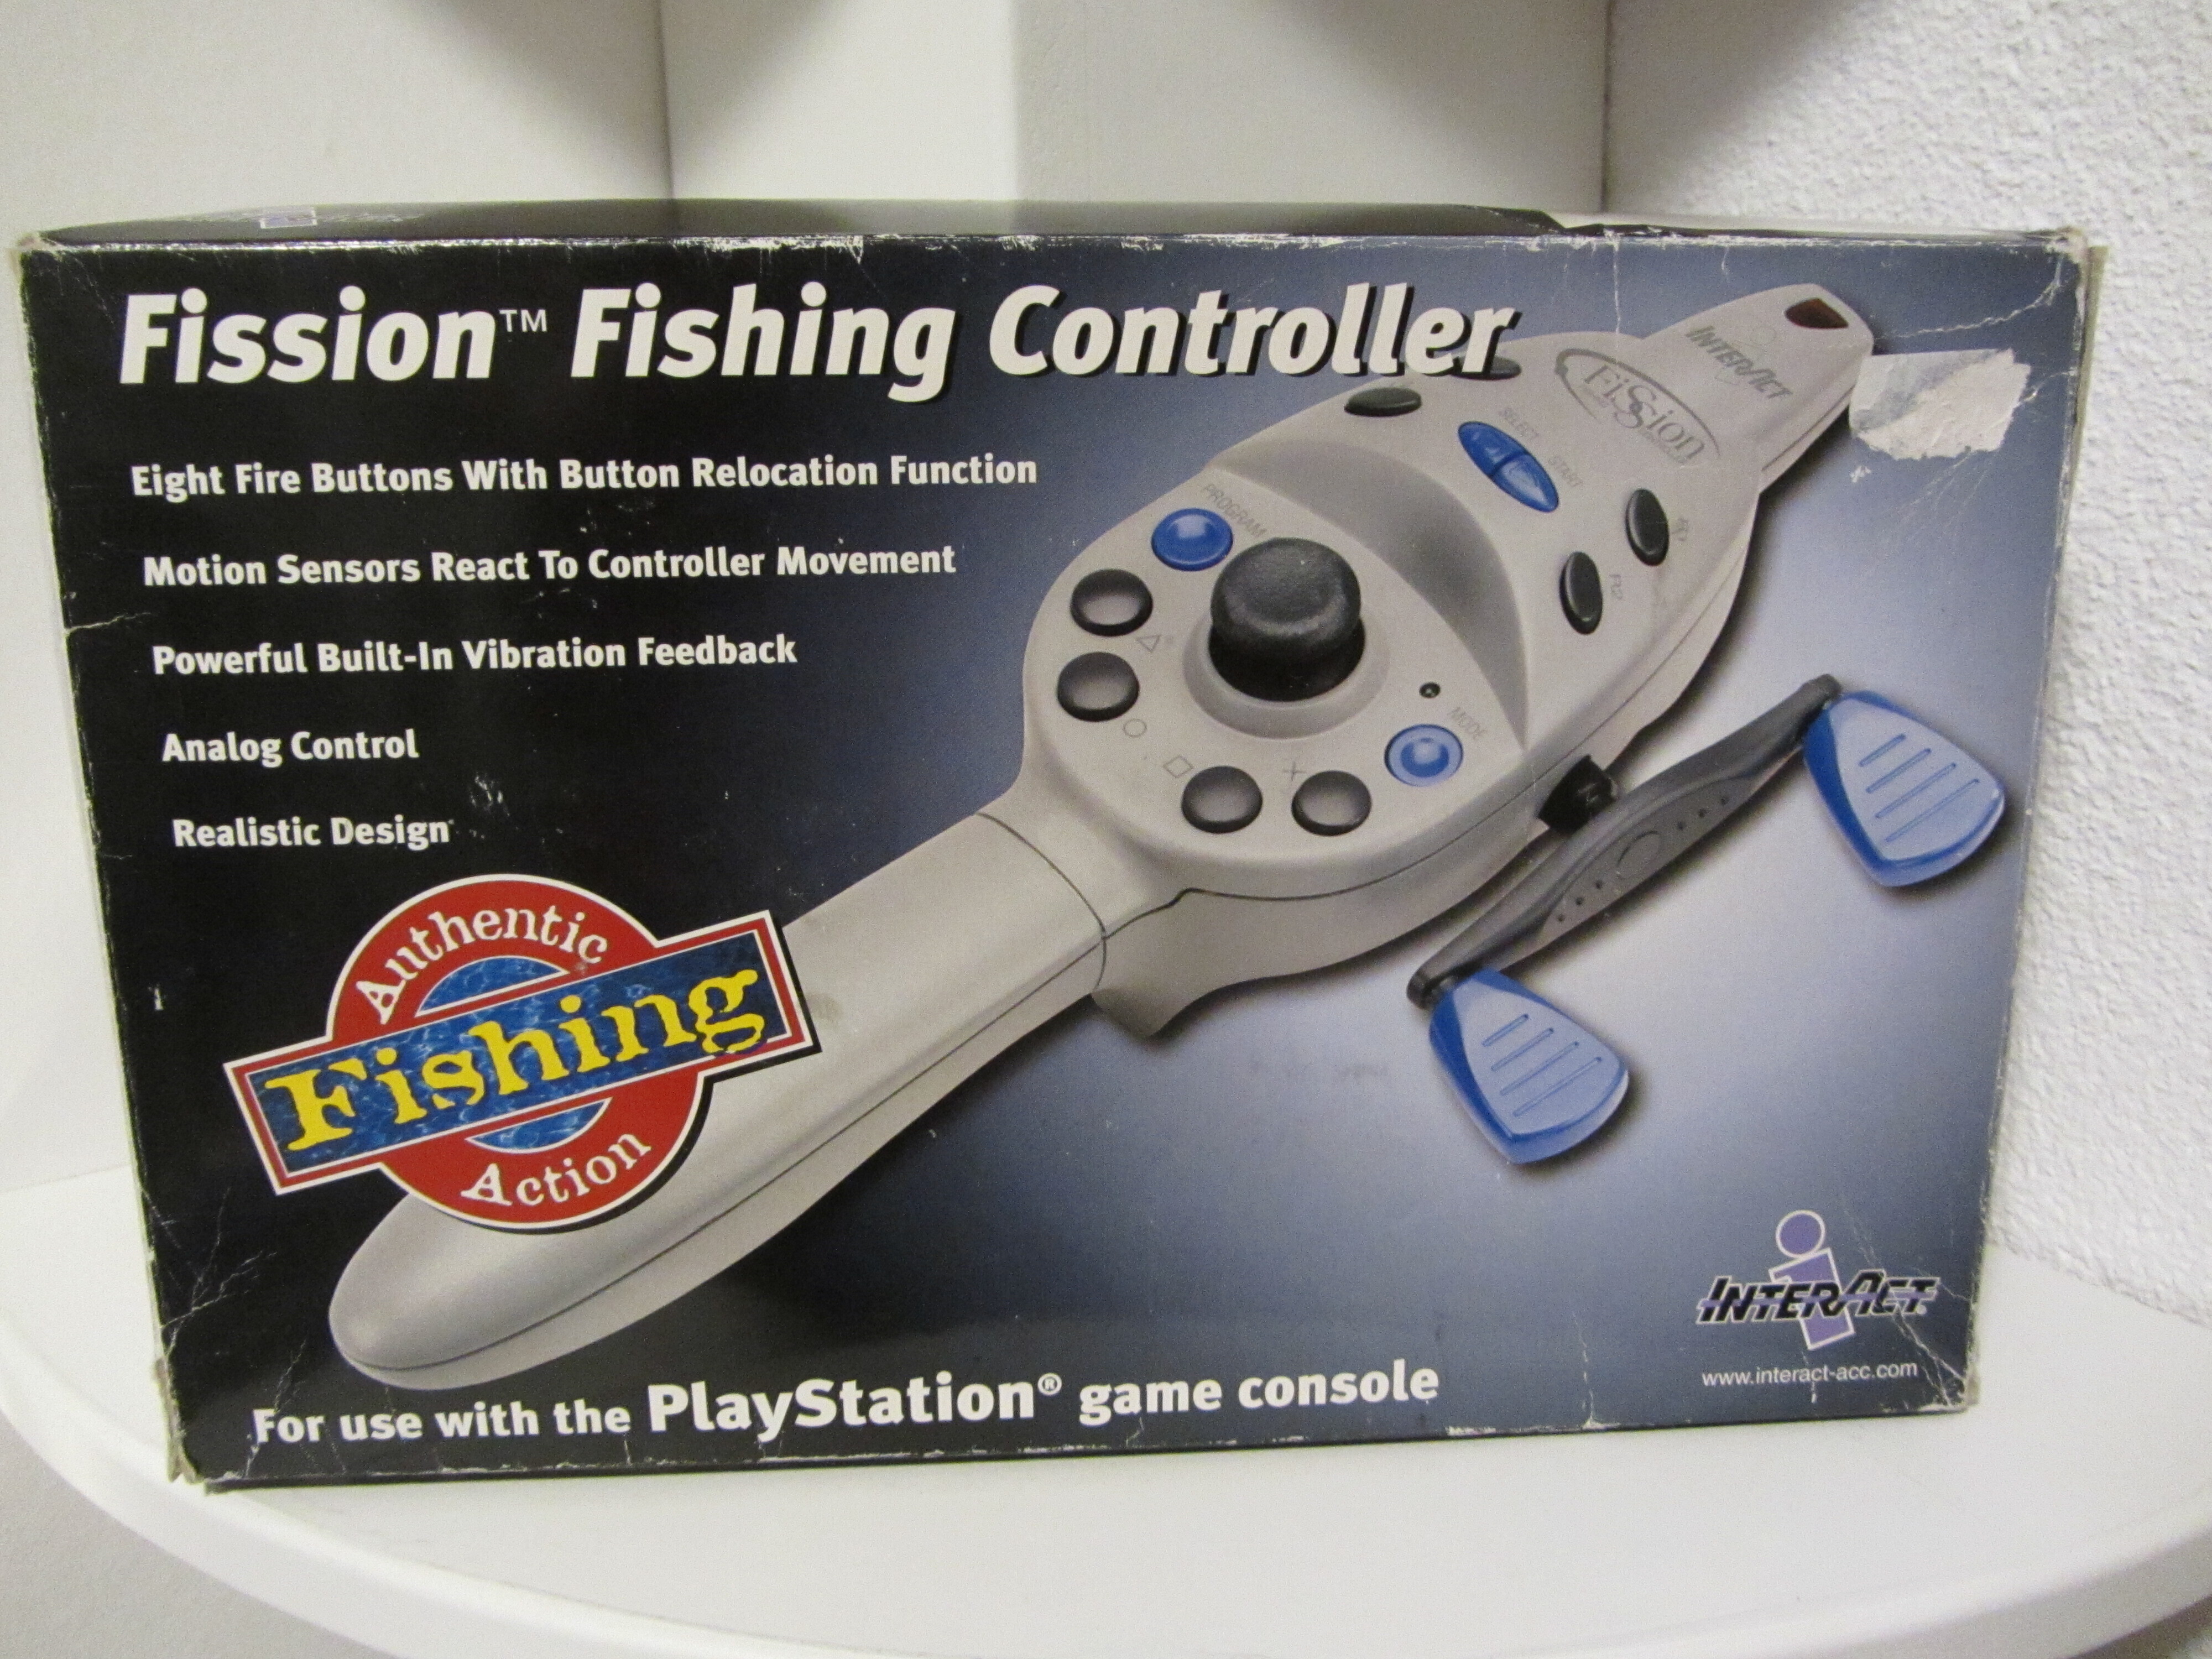  InterAct PlayStation Fission Fishing Controller